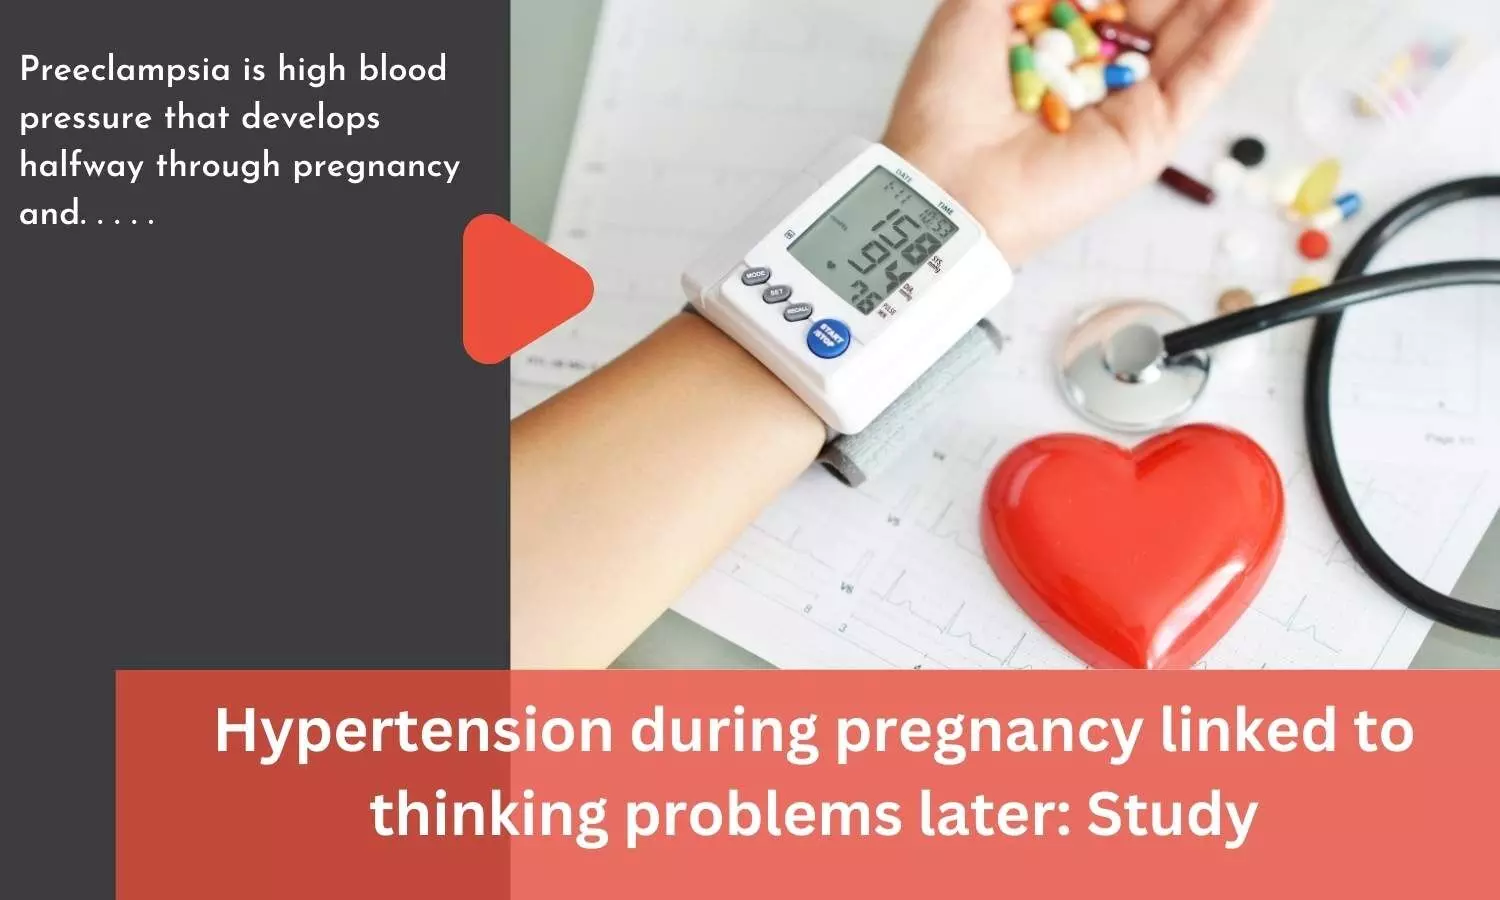 Hypertension during pregnancy linked to thinking problems later: Study